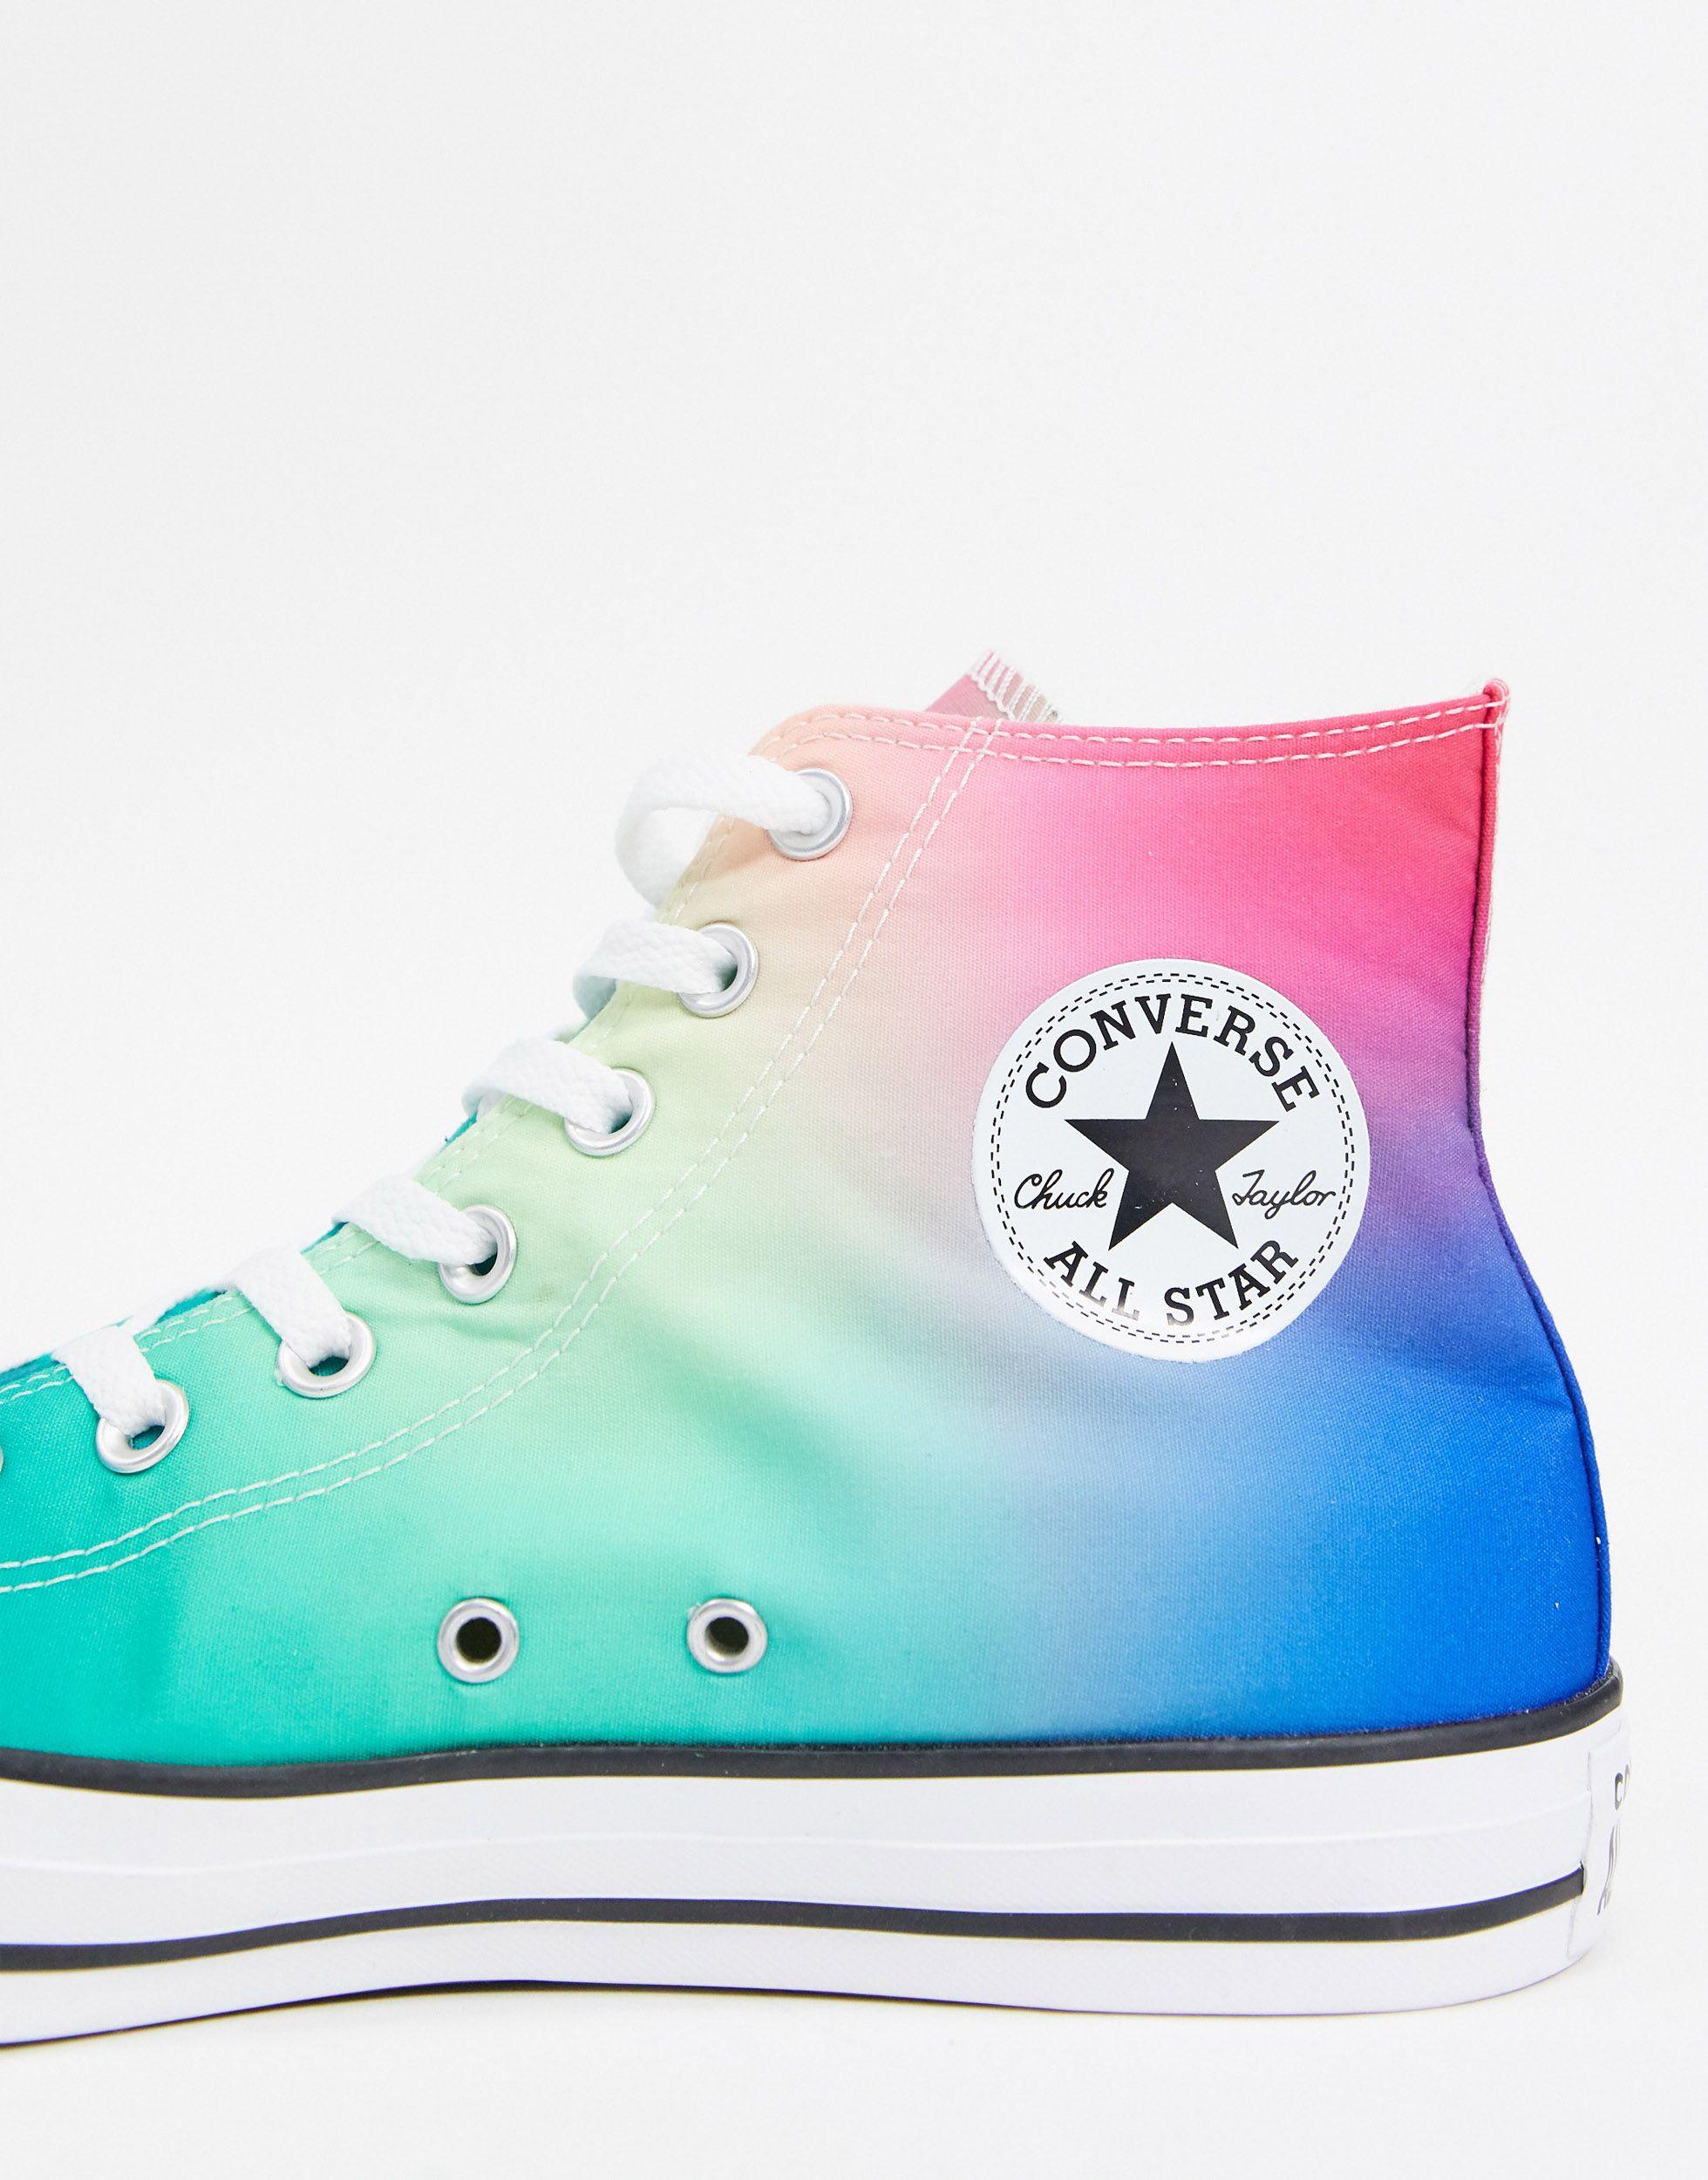 Converse Chuck Taylor All Star Hi Ombre Sneakers in Blue | Lyst